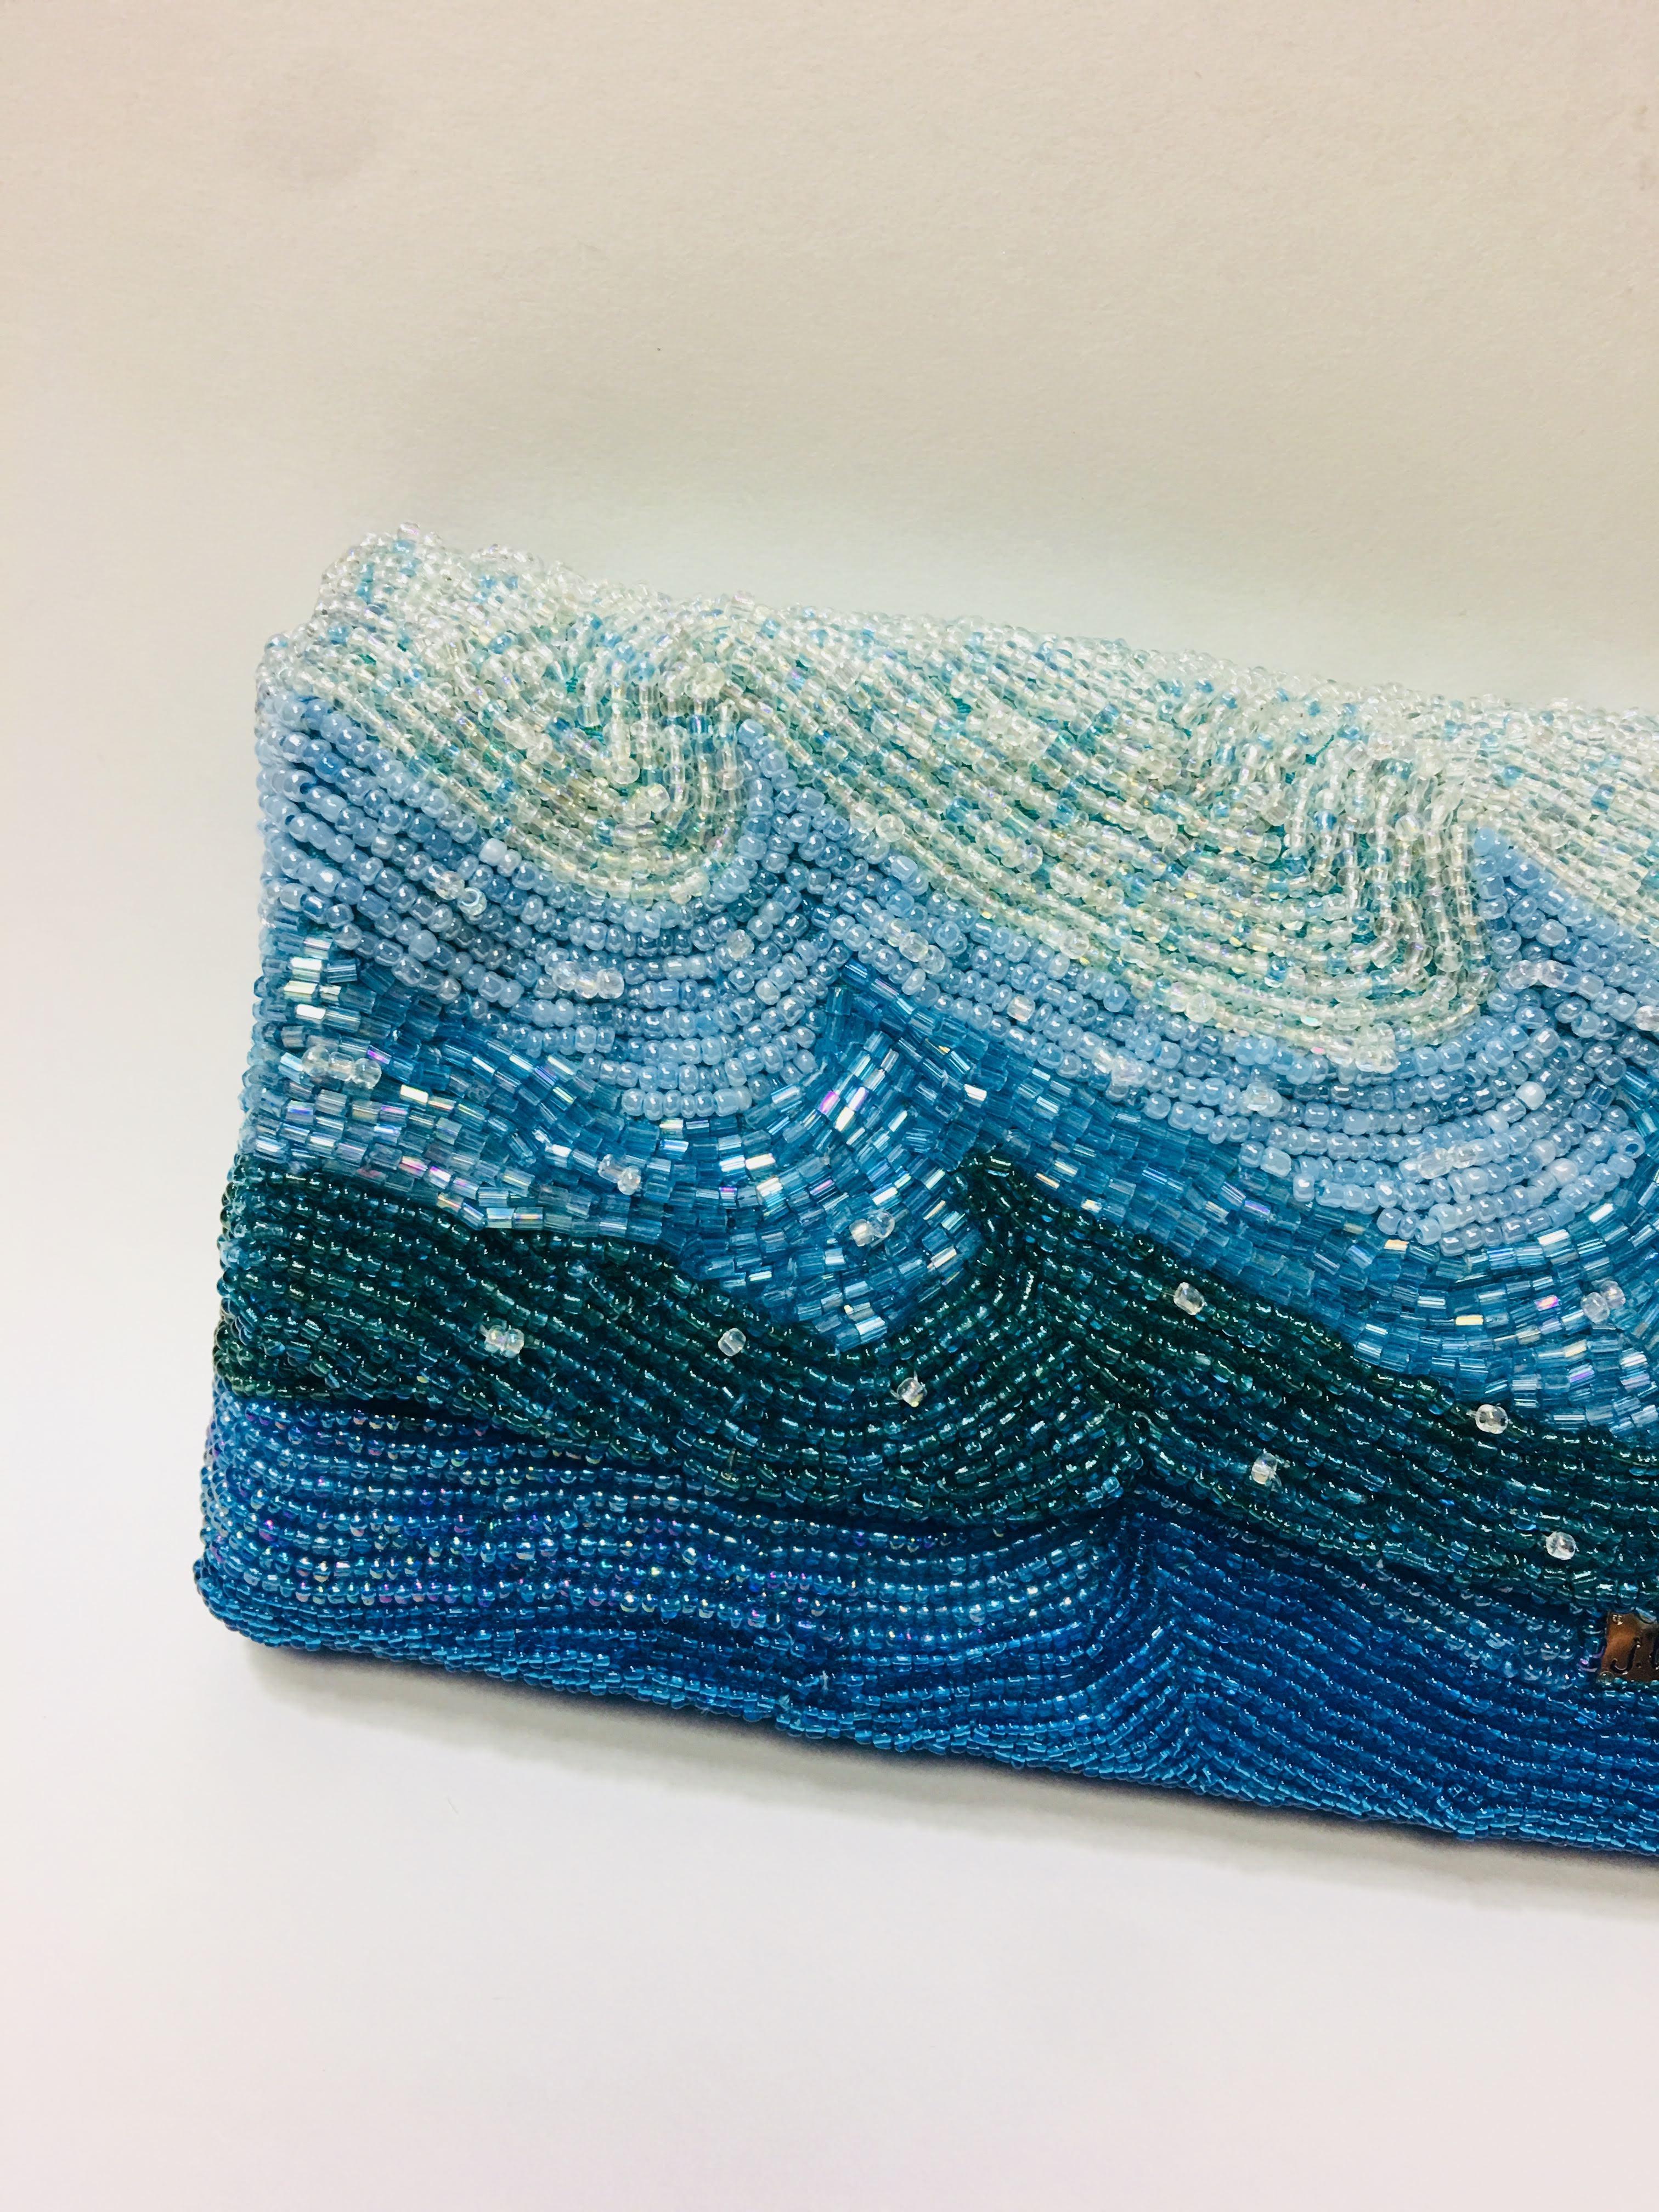 J. Lhuiller Beaded Clutch with Magnetic Closure. Envelope Style With Multiple Shades of Blue Beads in a Wave Design.